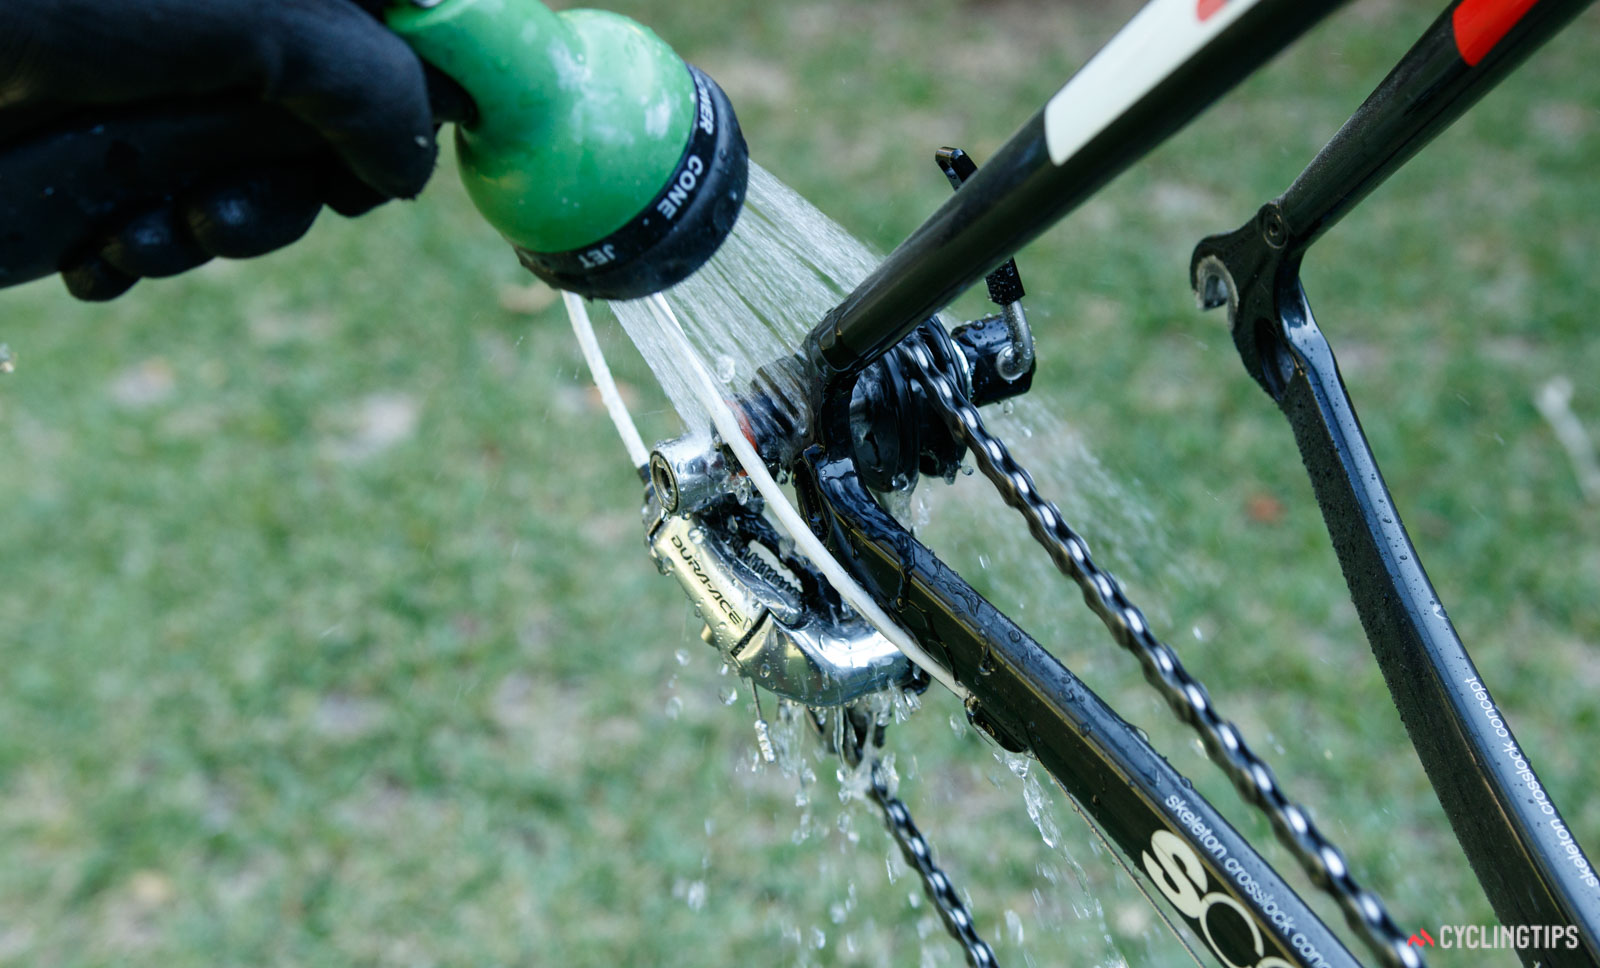 Bicycle-chain-cleaning-how-to-12. Jpg